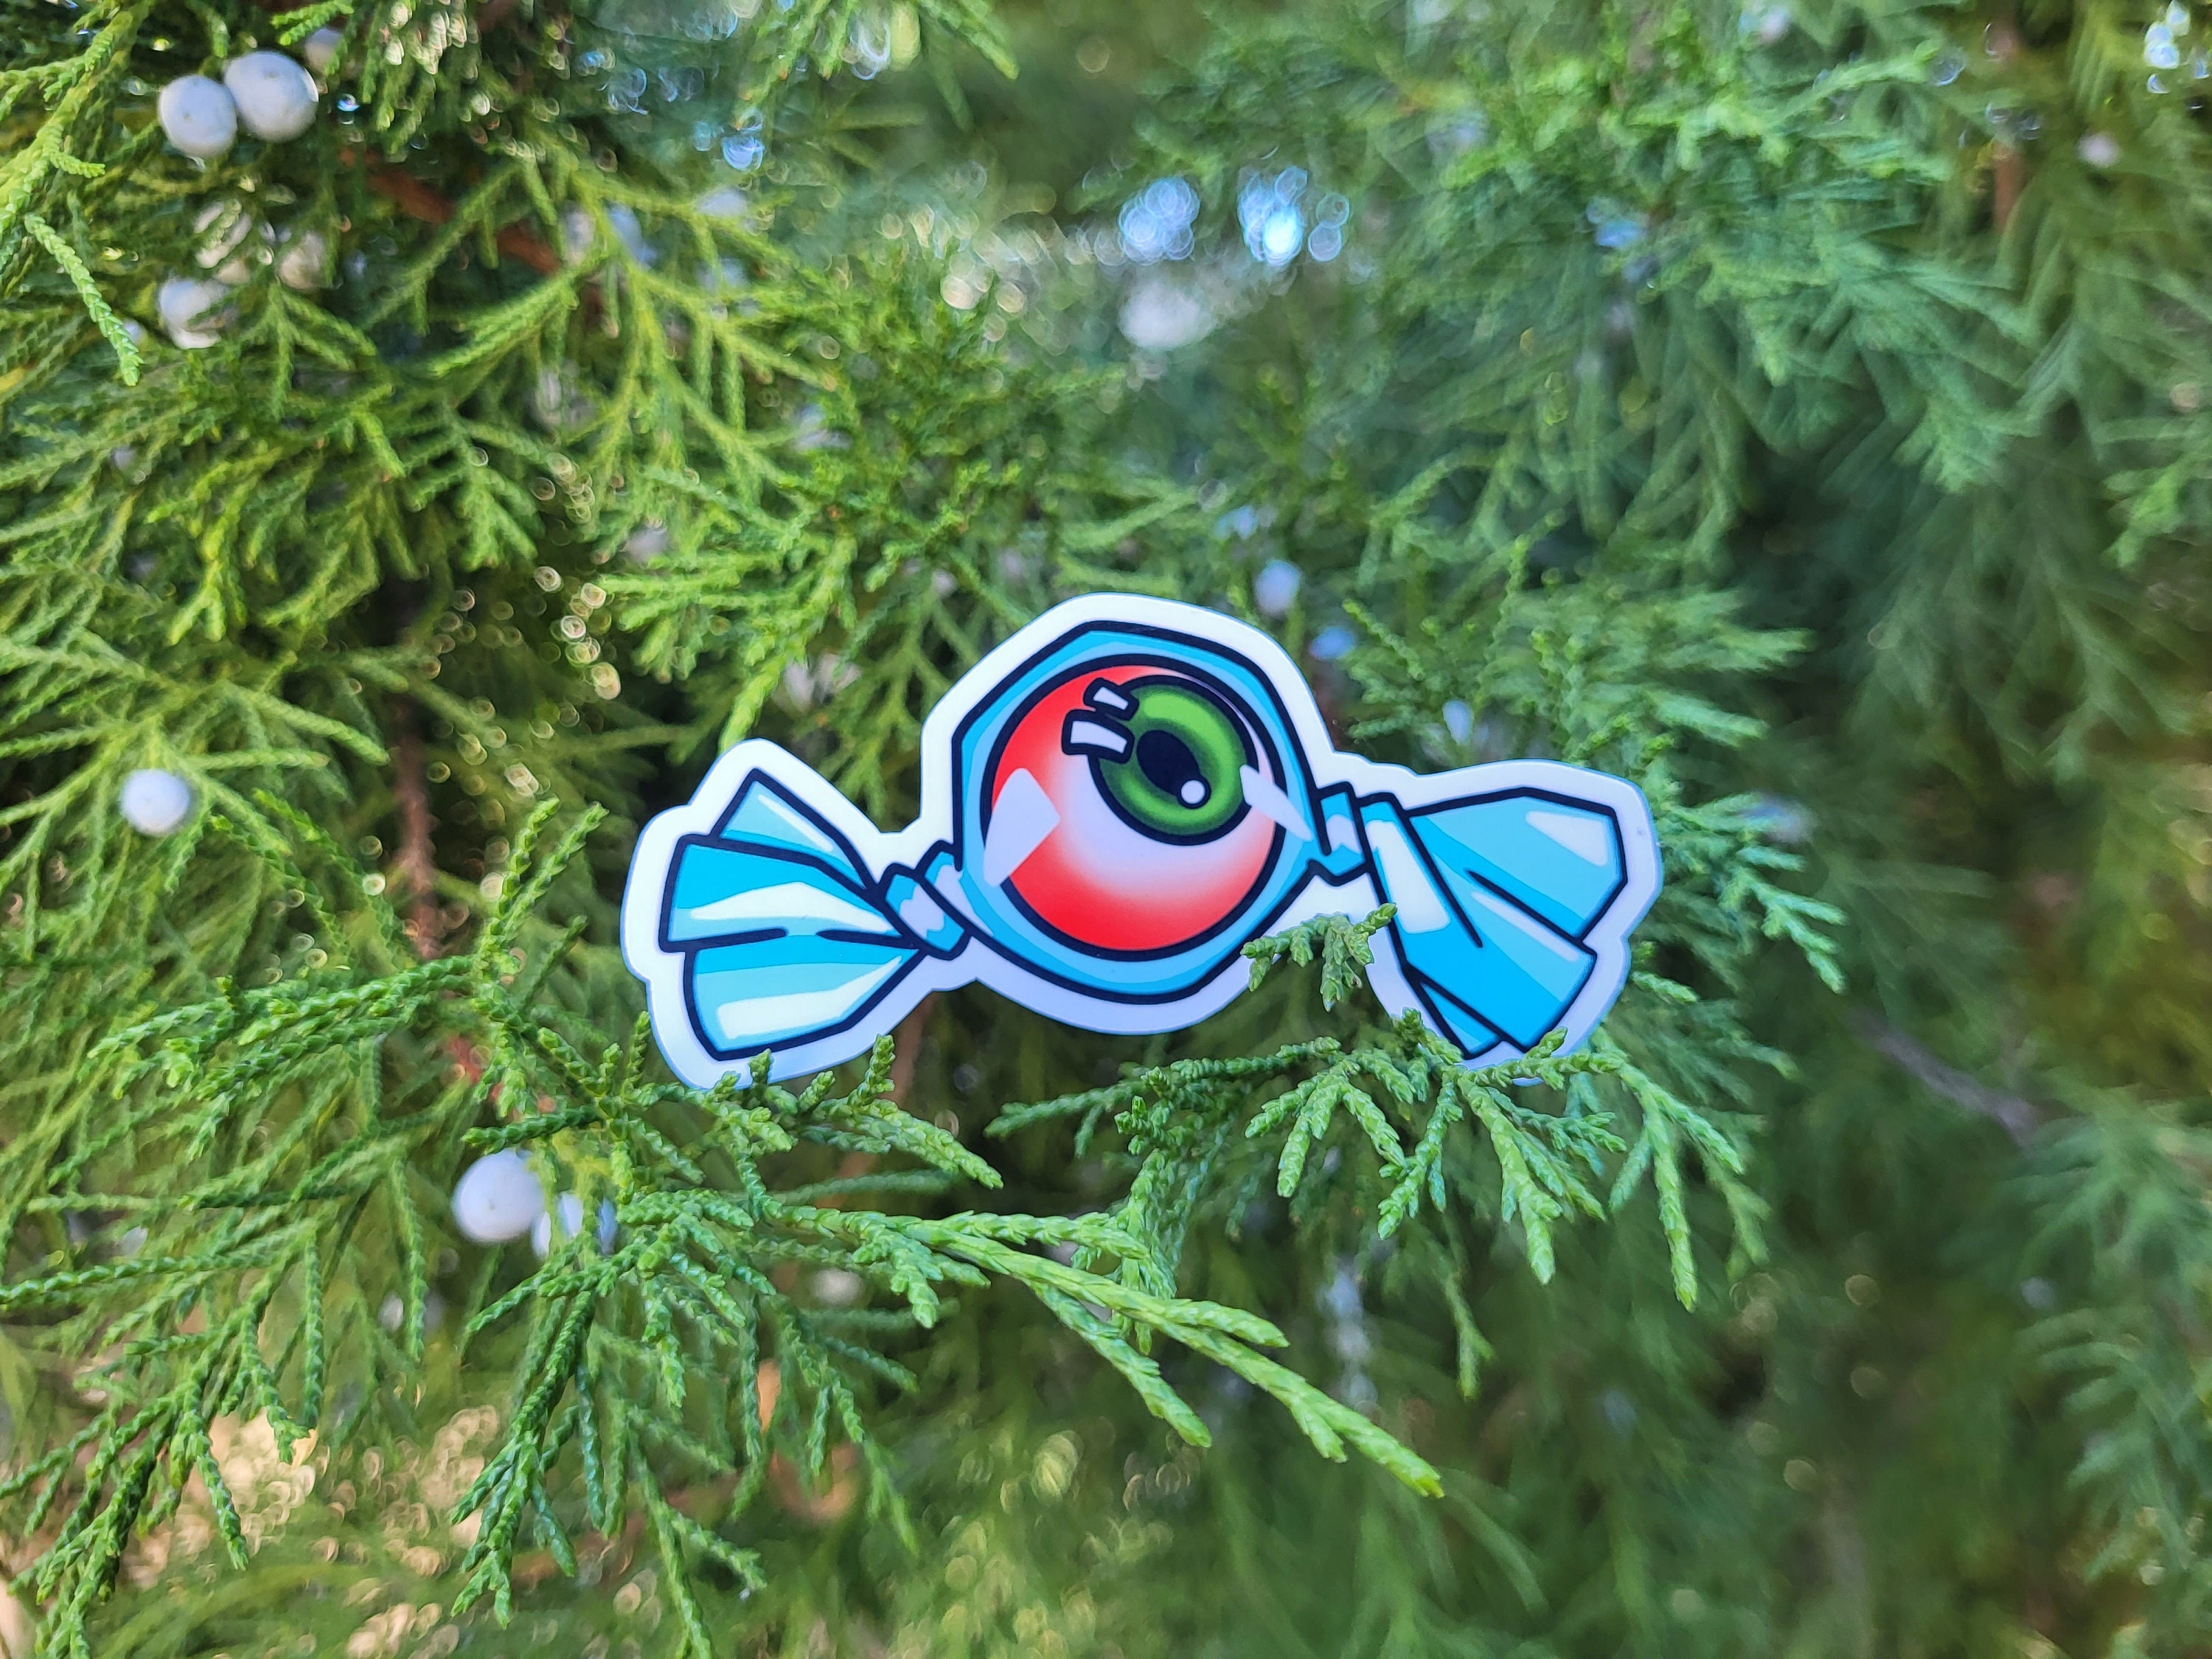 Jar of Eyeball Stickers (1/2 each), Seasonal Stickers perfect for  Calendars, Planners and More